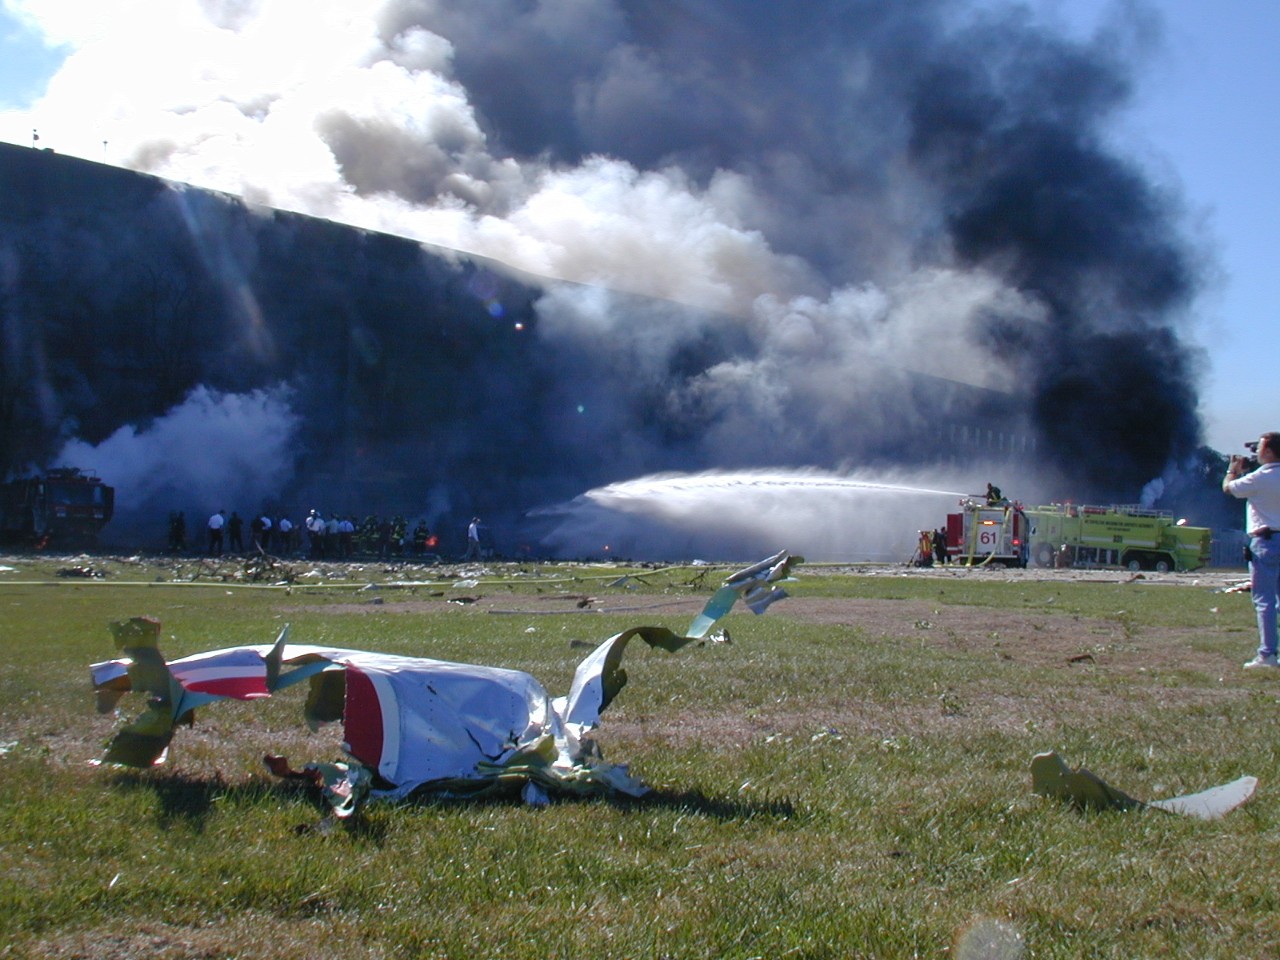 Firefighters attempt to put out the burning Pentagon on the day of the attack, 11 September 2001